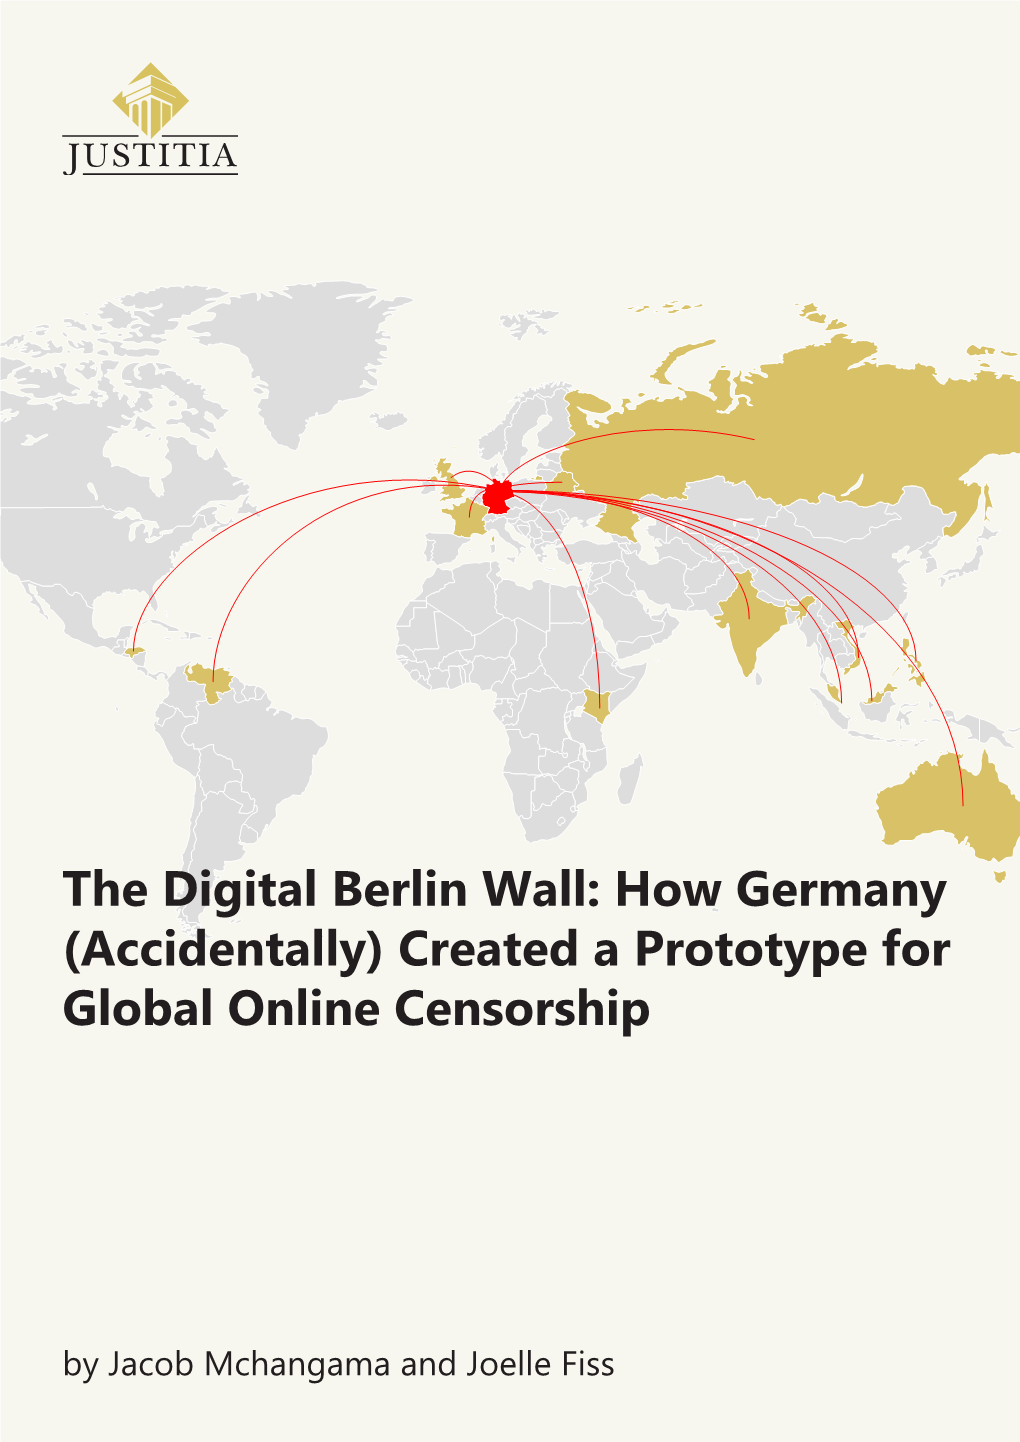 The Digital Berlin Wall: How Germany (Accidentally) Created a Prototype for Global Online Censorship